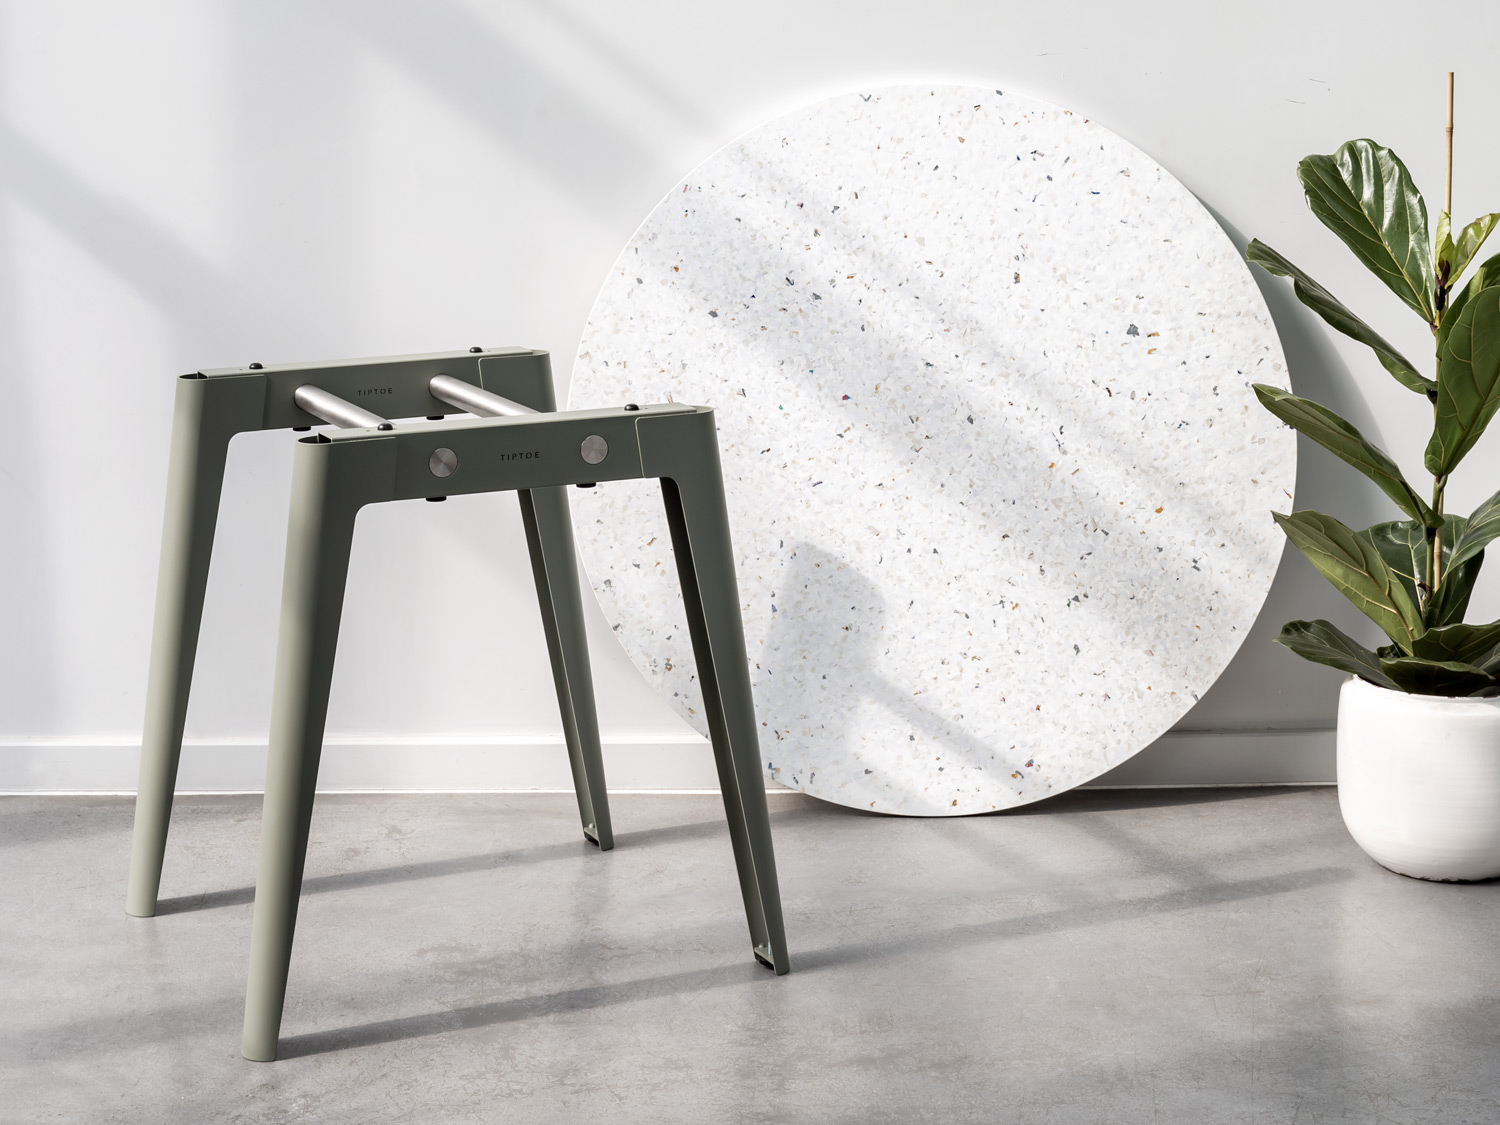 NEW MODERN : the new table system by TIPTOE